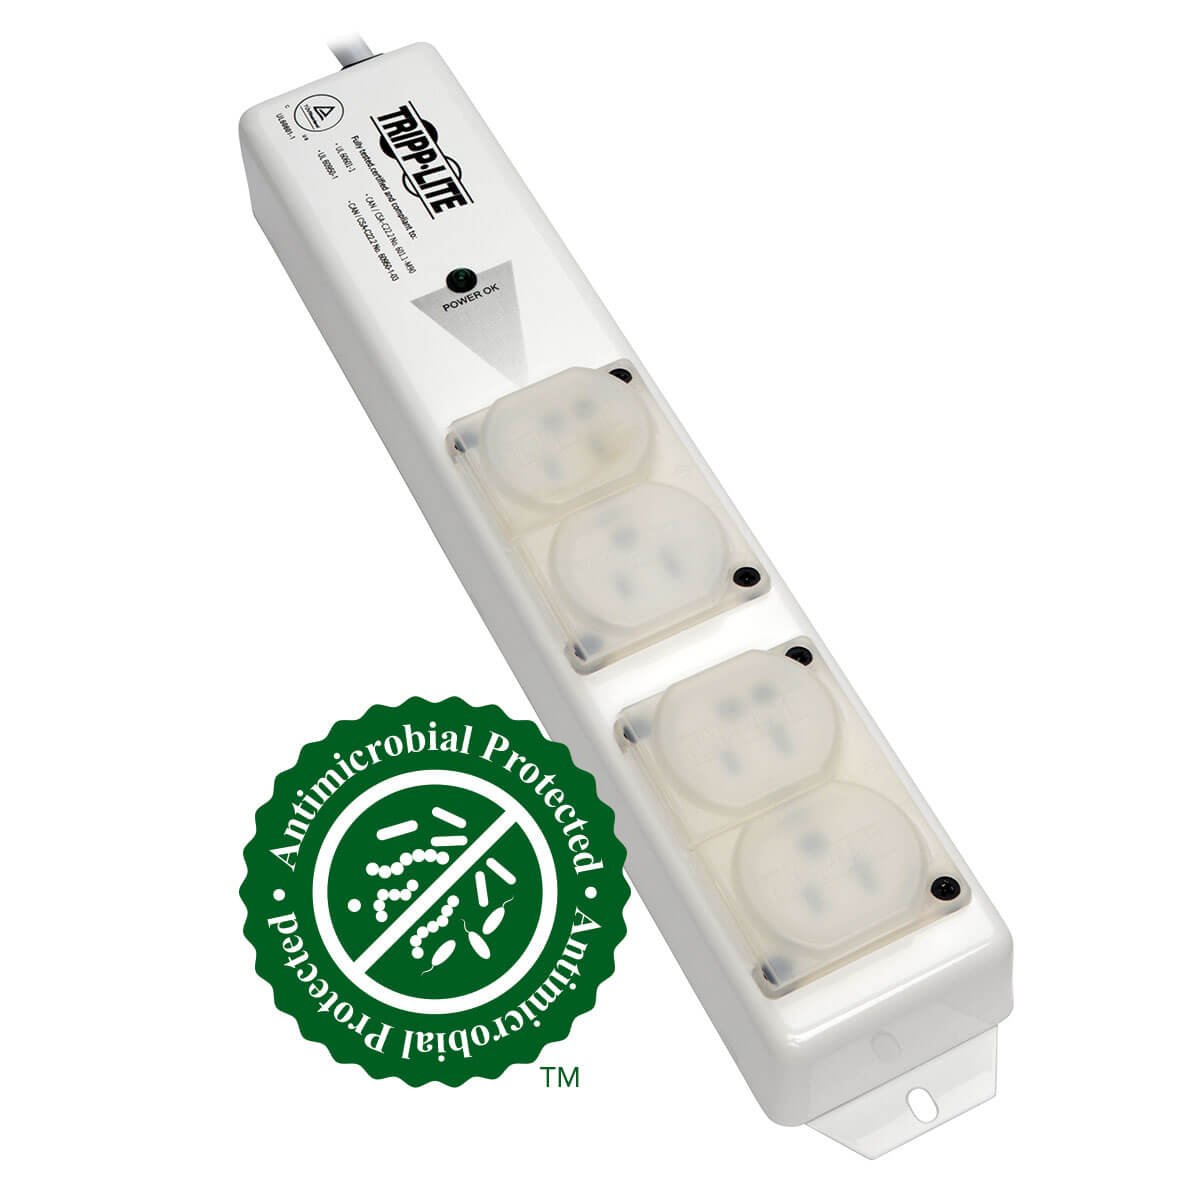 Tripp Lite Safe-IT Hospital-Grade Power Strip for Patient-Care Vicinity, 4 15A HG Outlets, UL 60601-1 Compliant, 6 Foot / 1.8M Cord, Outlet Safety Covers, White (PS-406-HGULTRA)